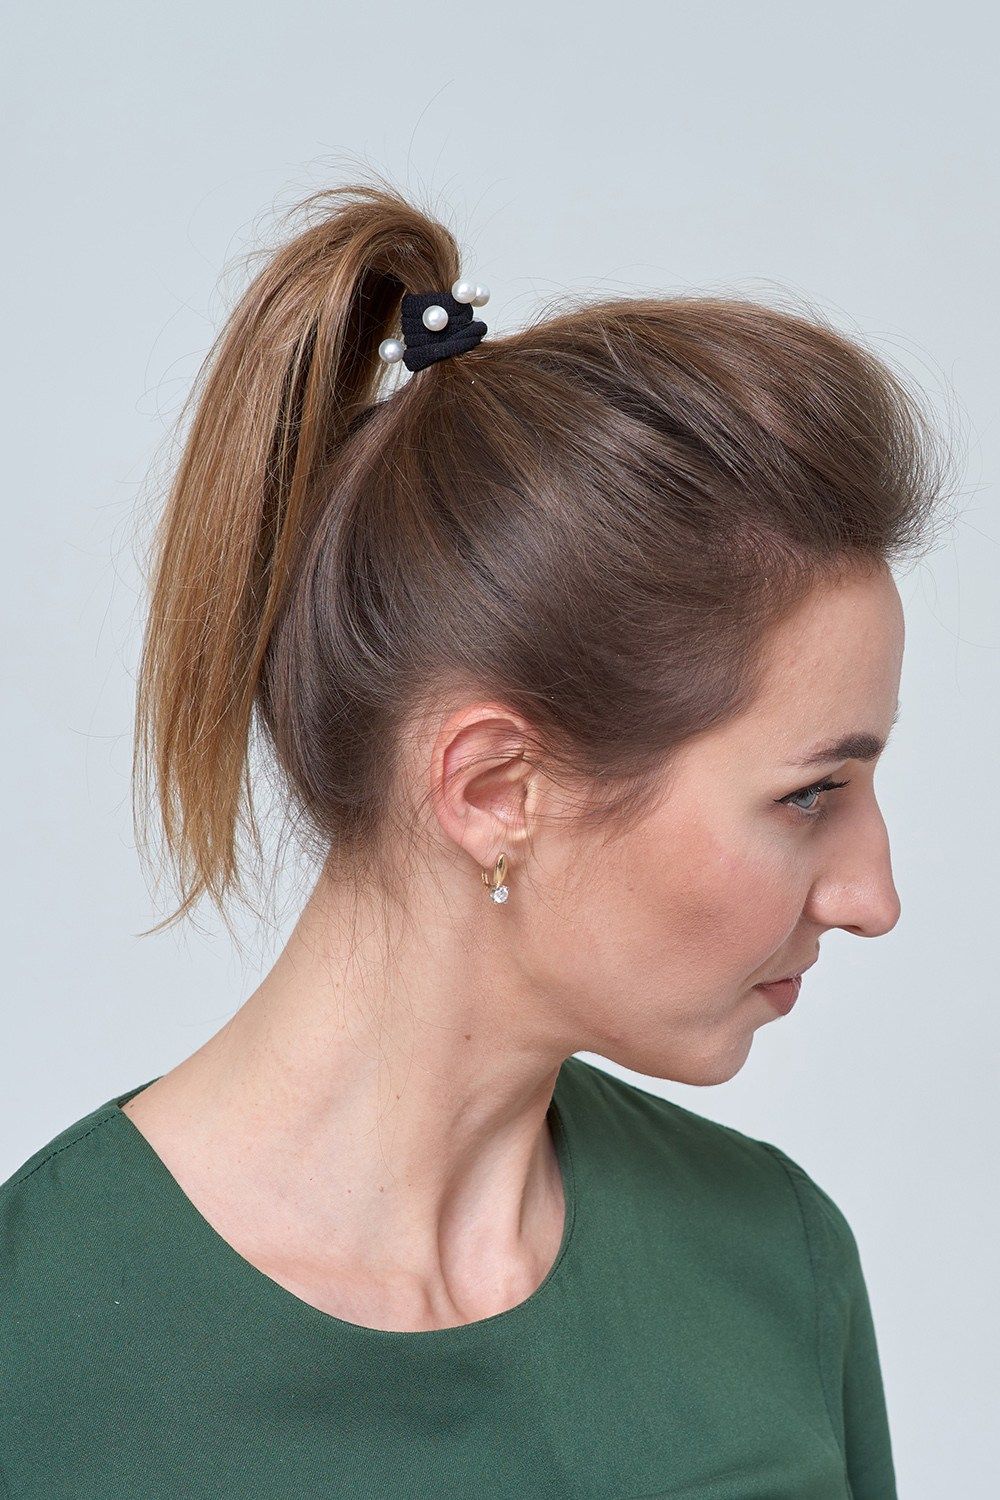 Effortless and Chic: Mastering the Messy Bun Hairstyle